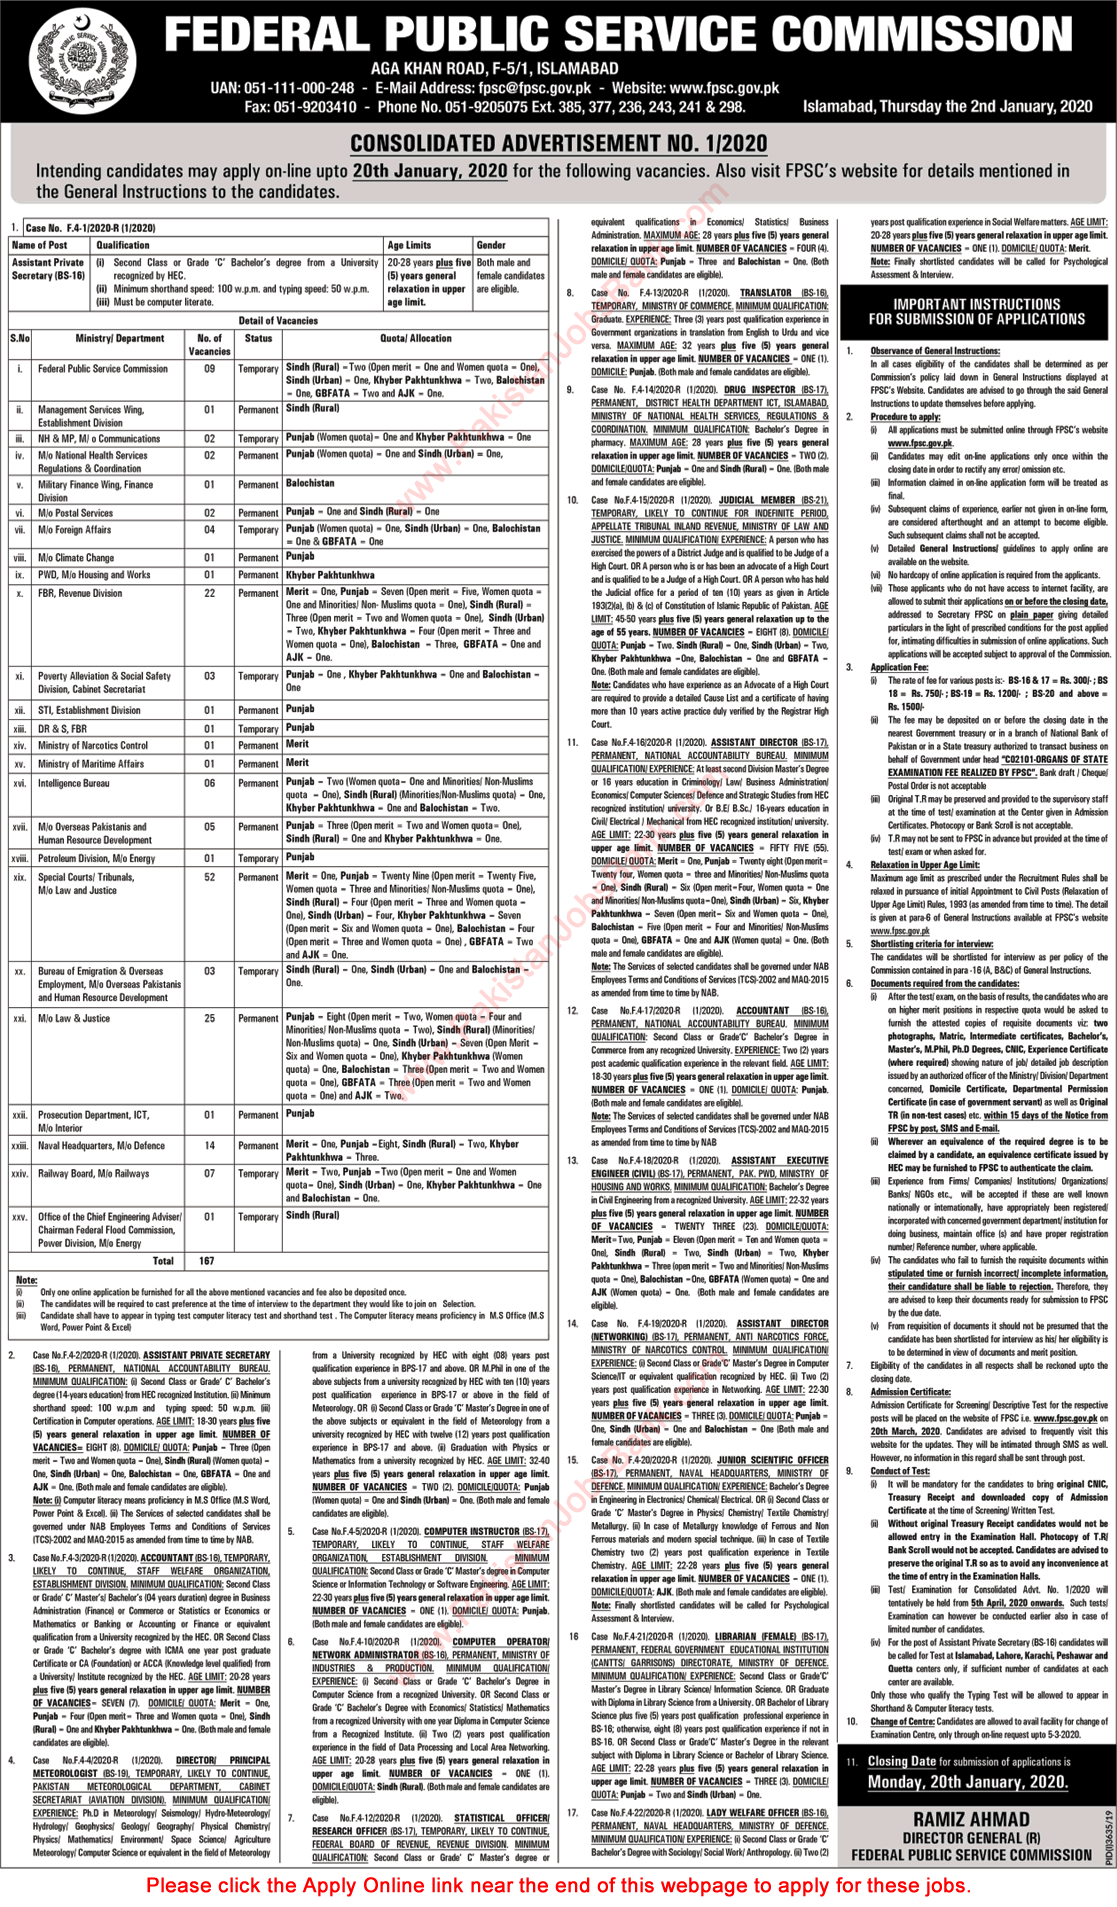 FPSC Jobs 2020 January Apply Online Consolidated Advertisement No 01/2020 Latest